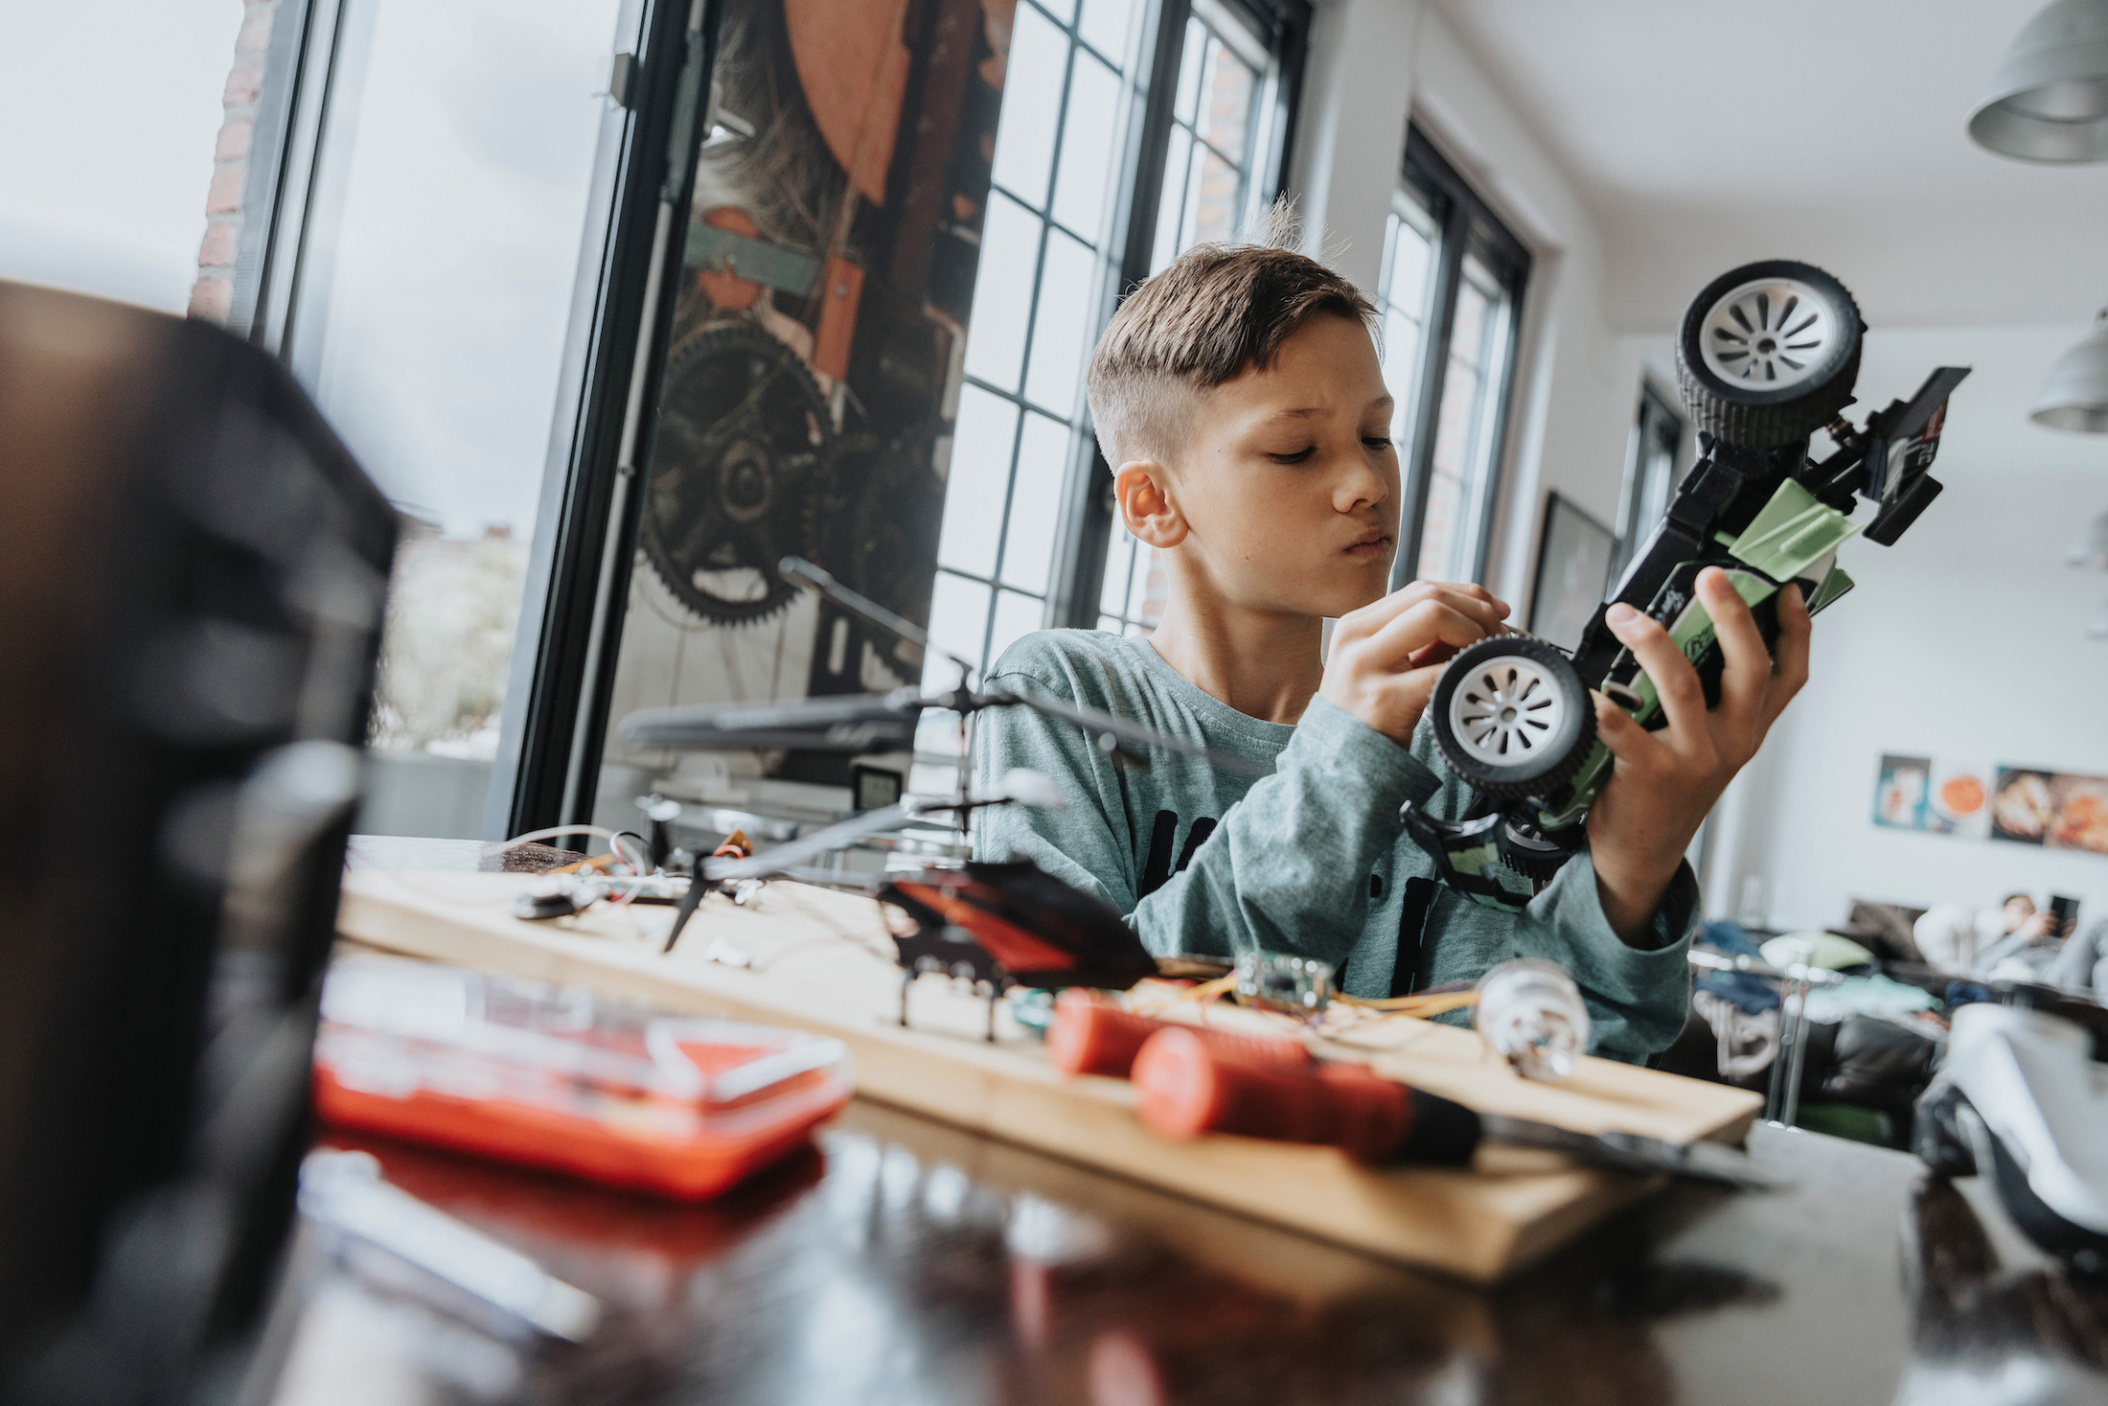 Boy tinkering on radio-controlled car with screwdriver and wires, Wuppertal, NRW, Germany